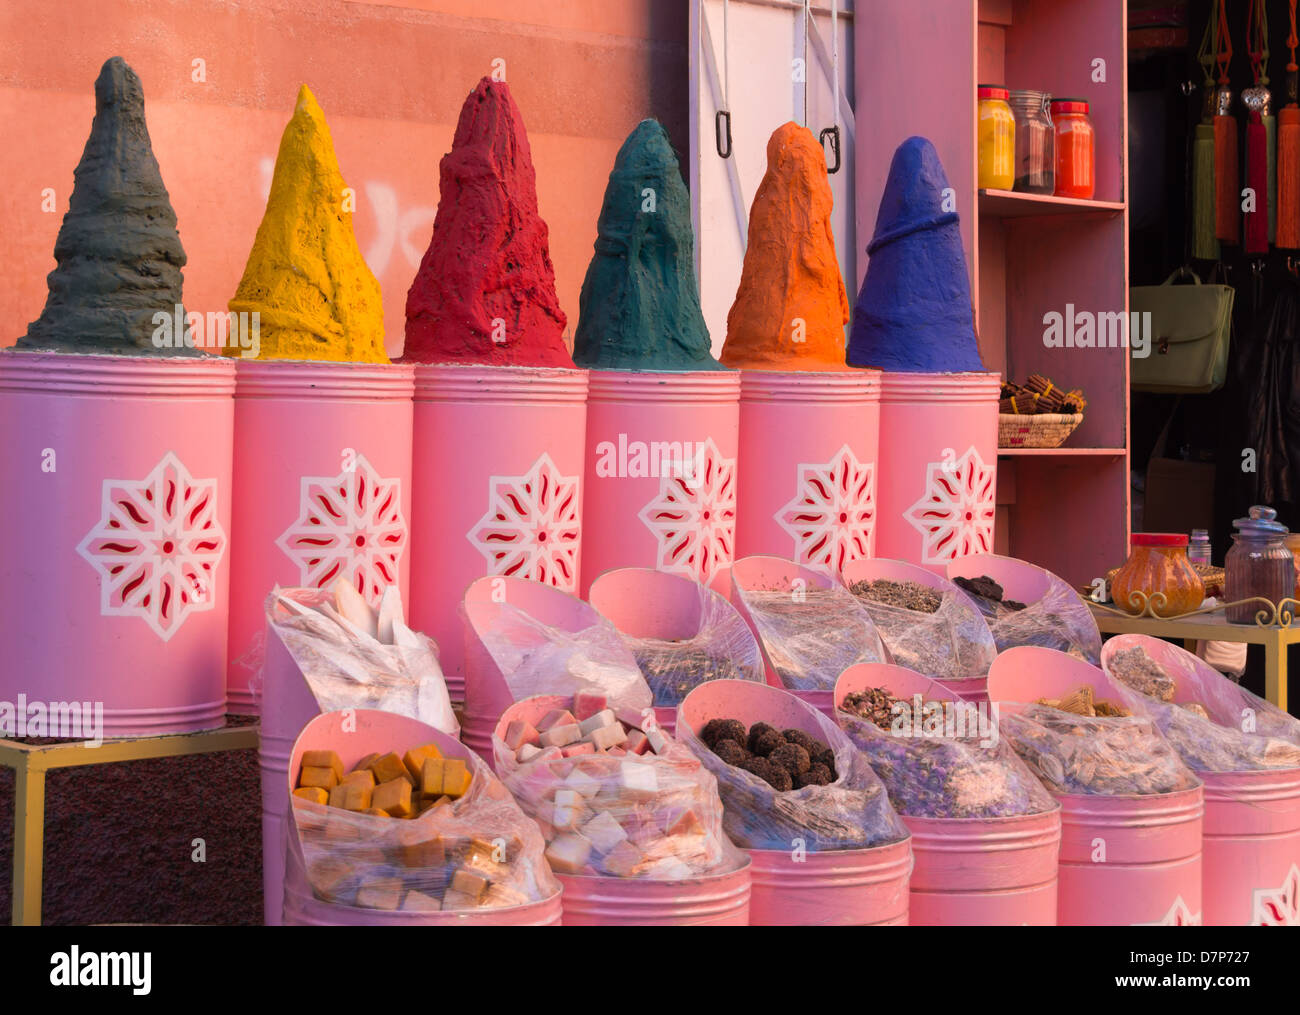 Marrakesh - plaster cones advertise pigment and dye sales. Stock Photo